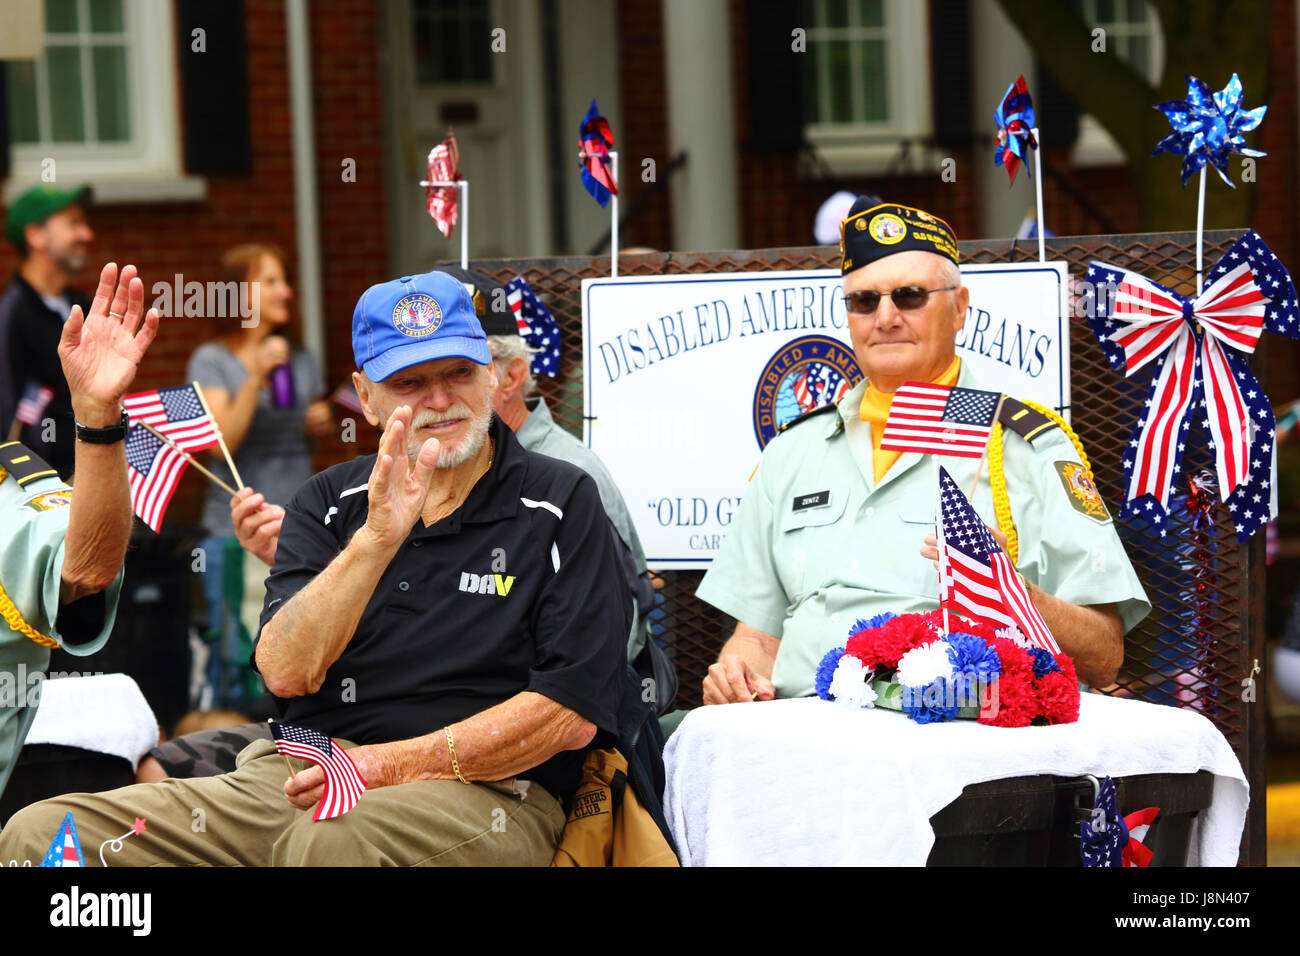 Westminster, Maryland, USA. 29th May, 2017. A disabled veteran waves to spectators while taking part in parades for Memorial Day, a federal holiday in the United States for remembering those who died while serving in the country's armed forces. Credit: James Brunker/Alamy Live News Stock Photo